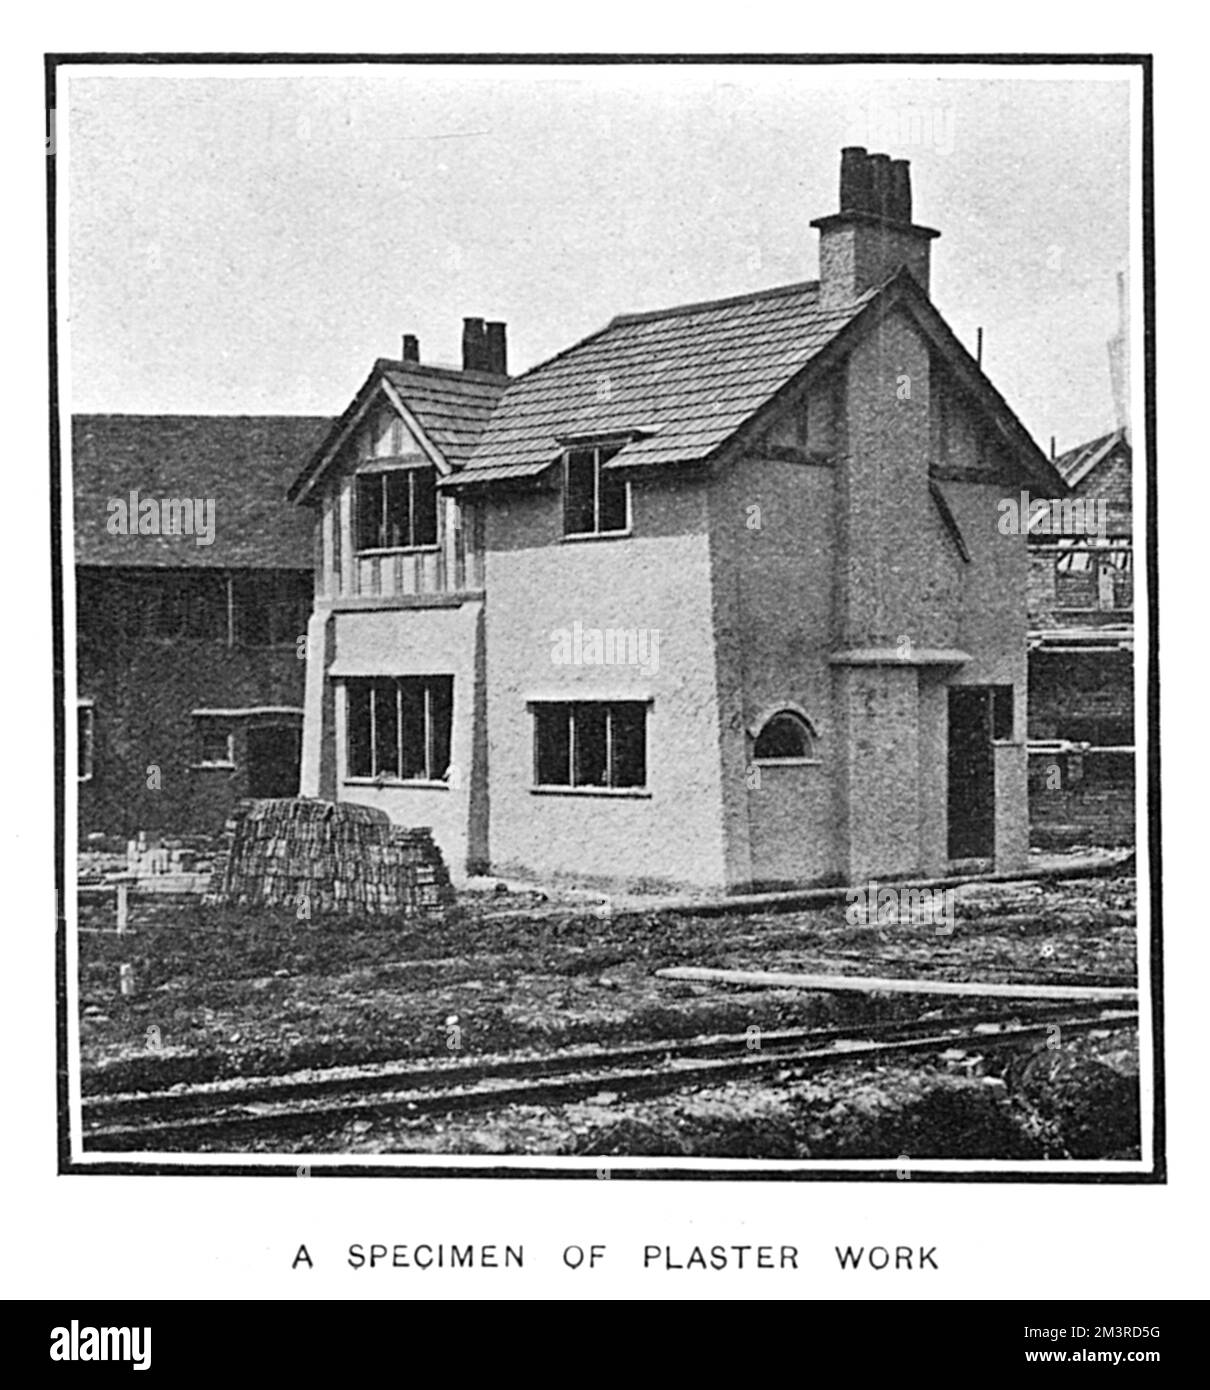 One of the cottages on show at the Cheap Cottages exhibition at Letchworth Garden City and Hitchin, descibed as a specimen of plaster work.      Date: 1905 Stock Photo